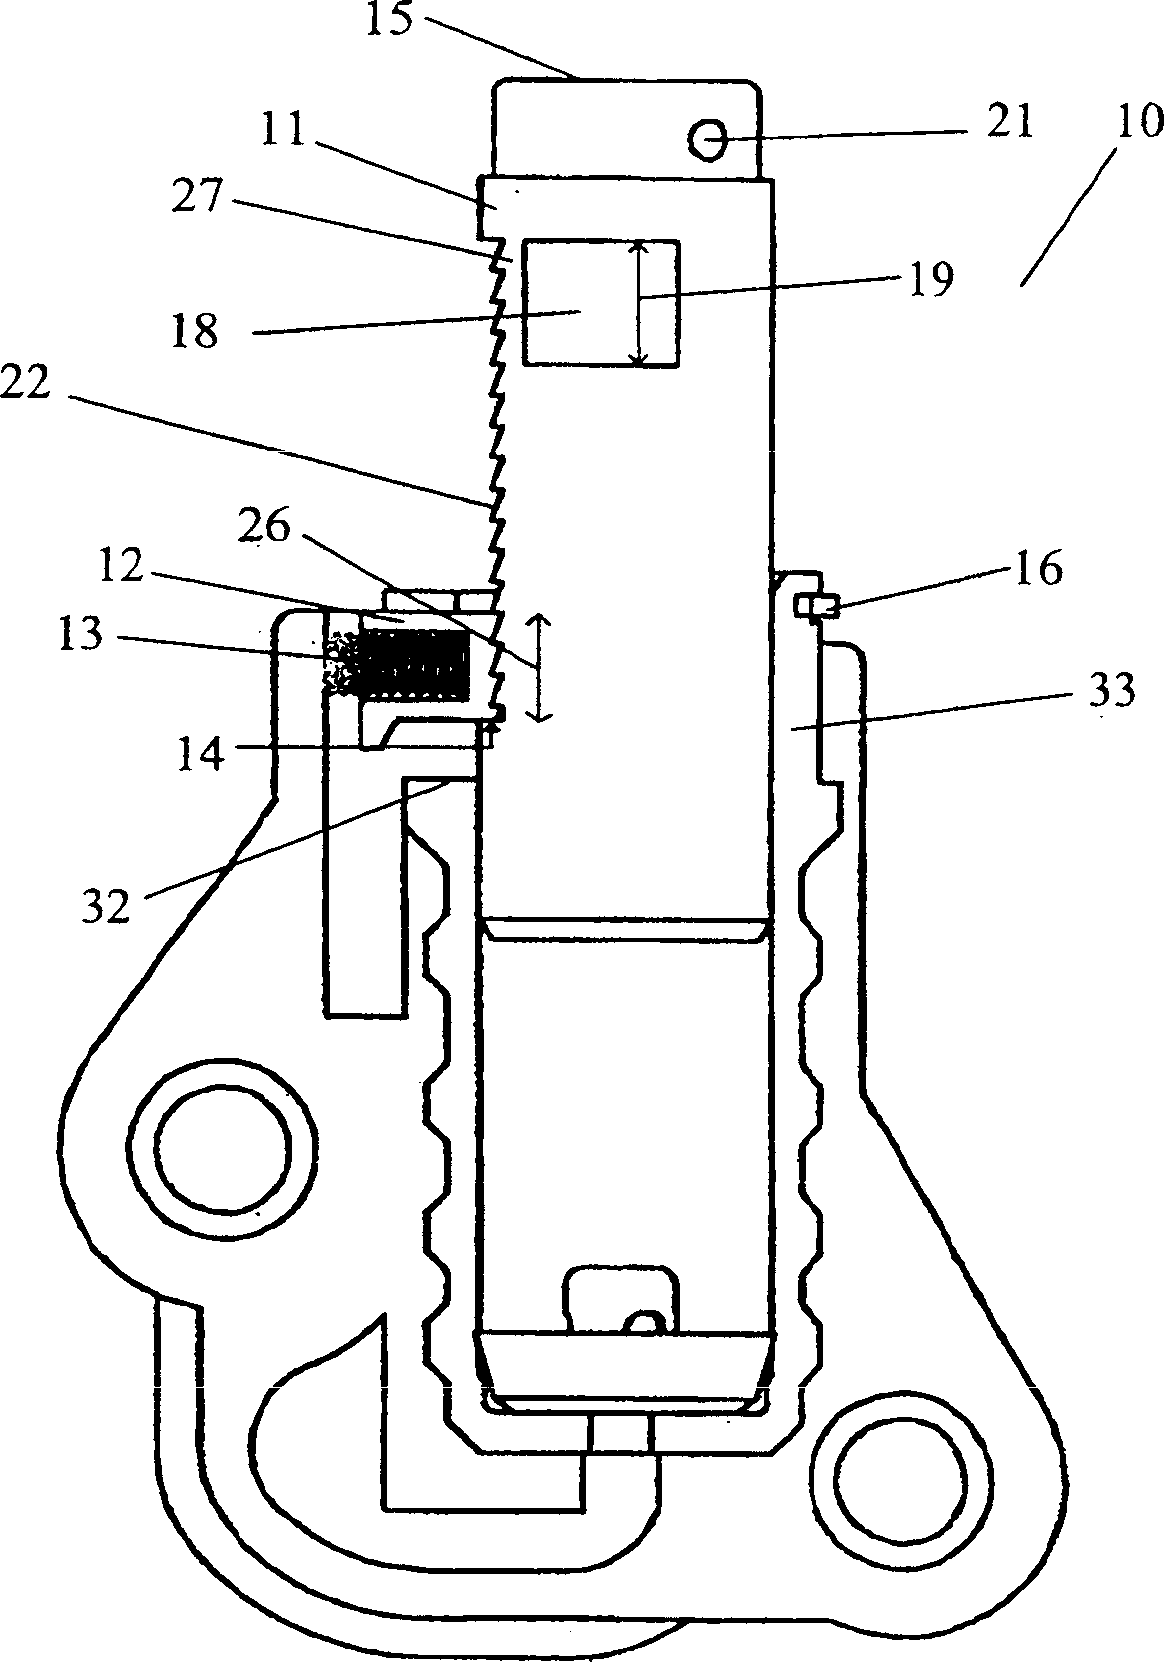 Tooth hydraulic chain tensioner with rotary reset and locking means